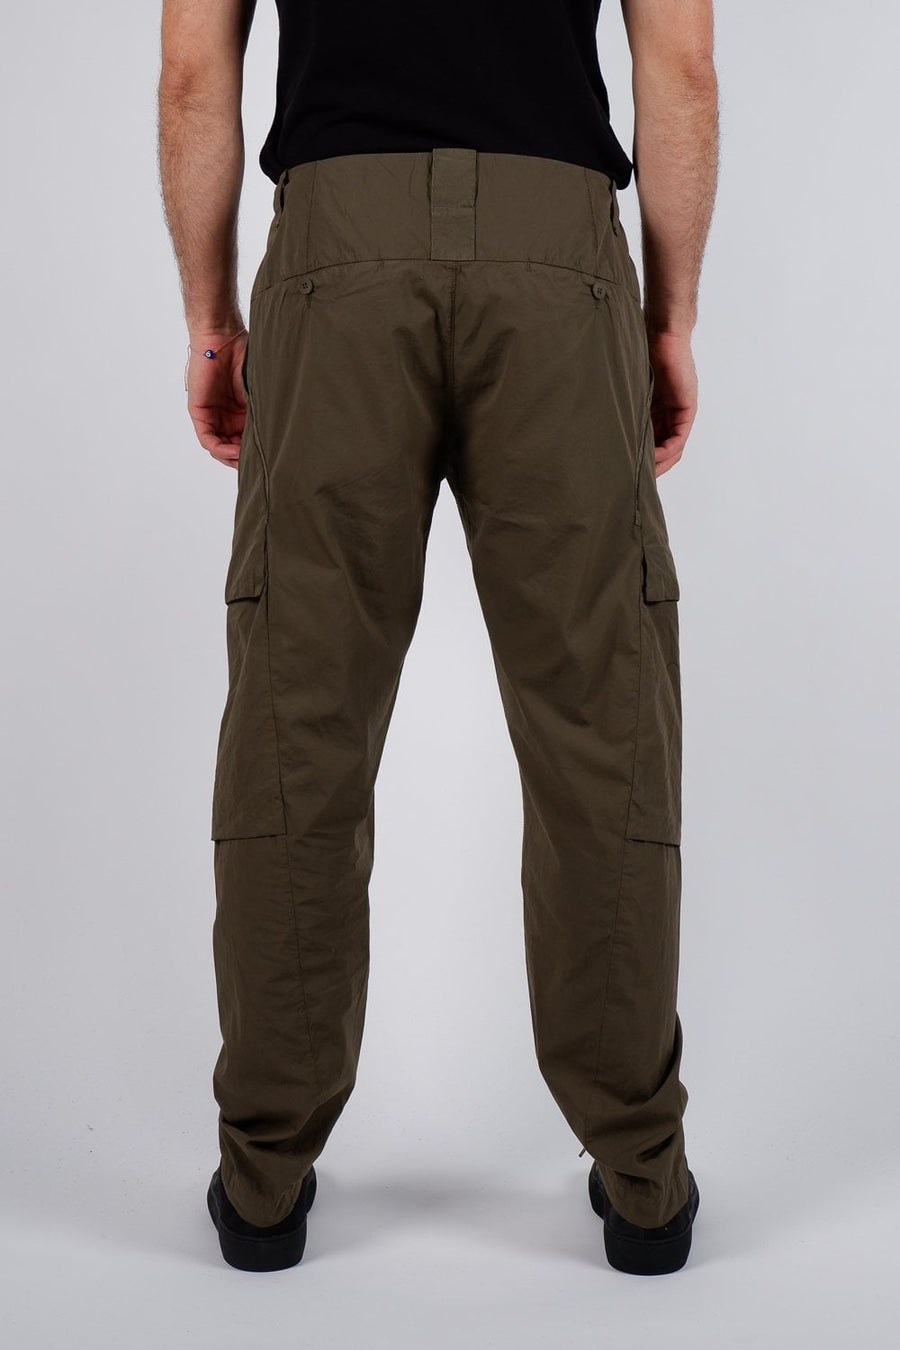 Buy the Transit Lightweight Cargo Trousers in Khaki at Intro. Spend £50 for free UK delivery. Official stockists. We ship worldwide.